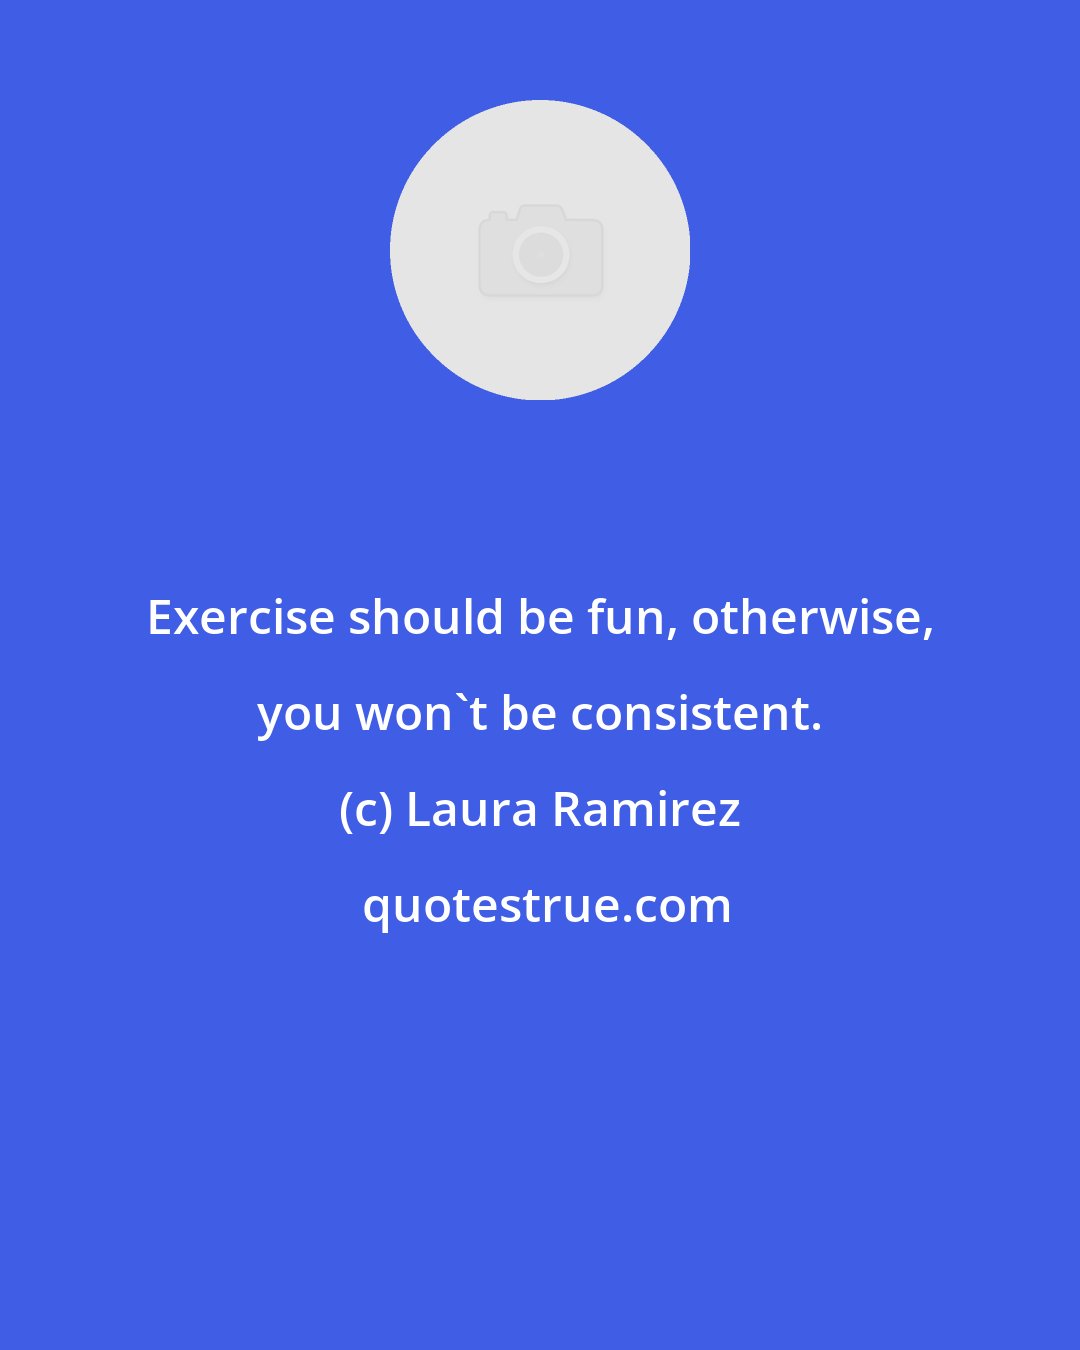 Laura Ramirez: Exercise should be fun, otherwise, you won't be consistent.